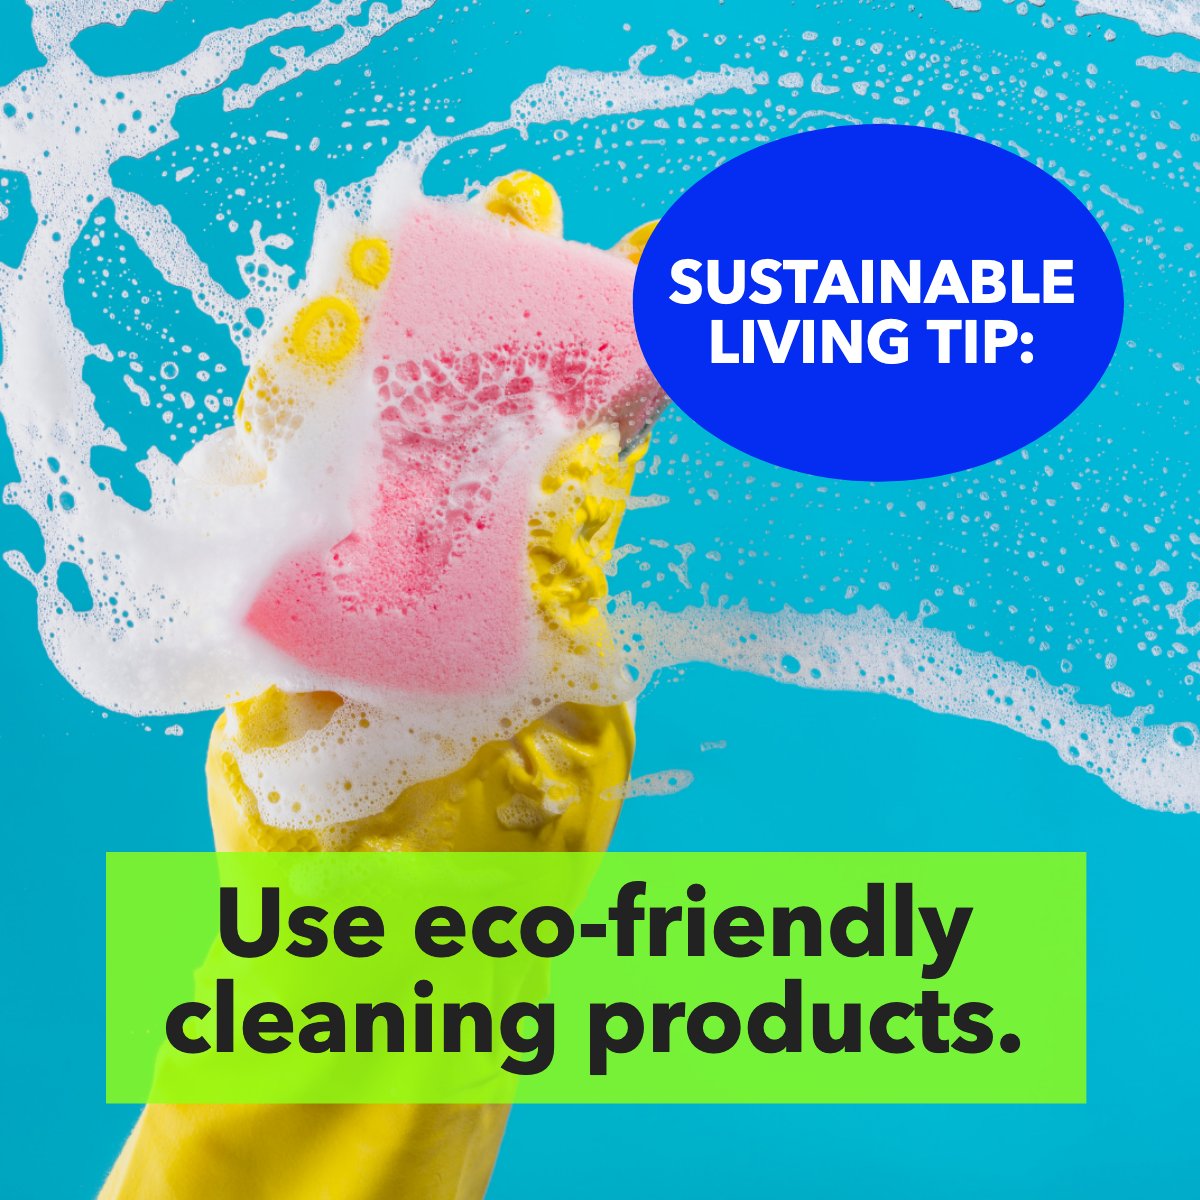 Your cleaning products 🧽️ can make a difference! 🌳 Always select eco-friendly cleaning products! 🧼️ Finding a list of products online is a click away! 🖱

#sustainablelifestyle #sustainable #sustainablity #sustainableproducts